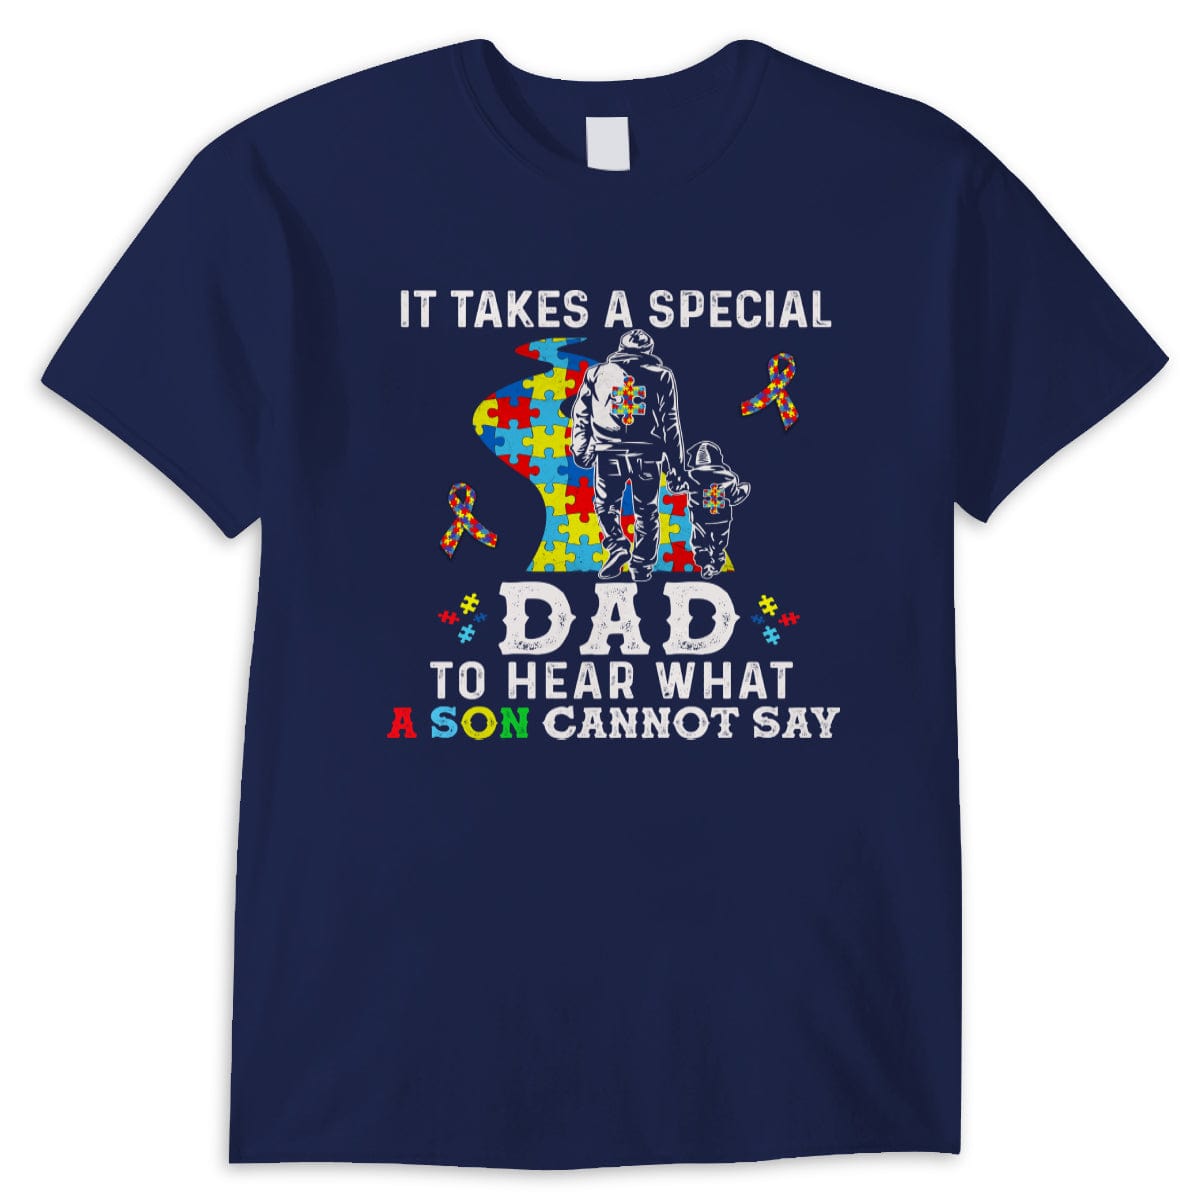 Autism Awareness Support Shirt, Autism Dad Shirt, It Takes Special Dad to Hear What Son Cannot Say, Puzzle Piece Road Ribbon